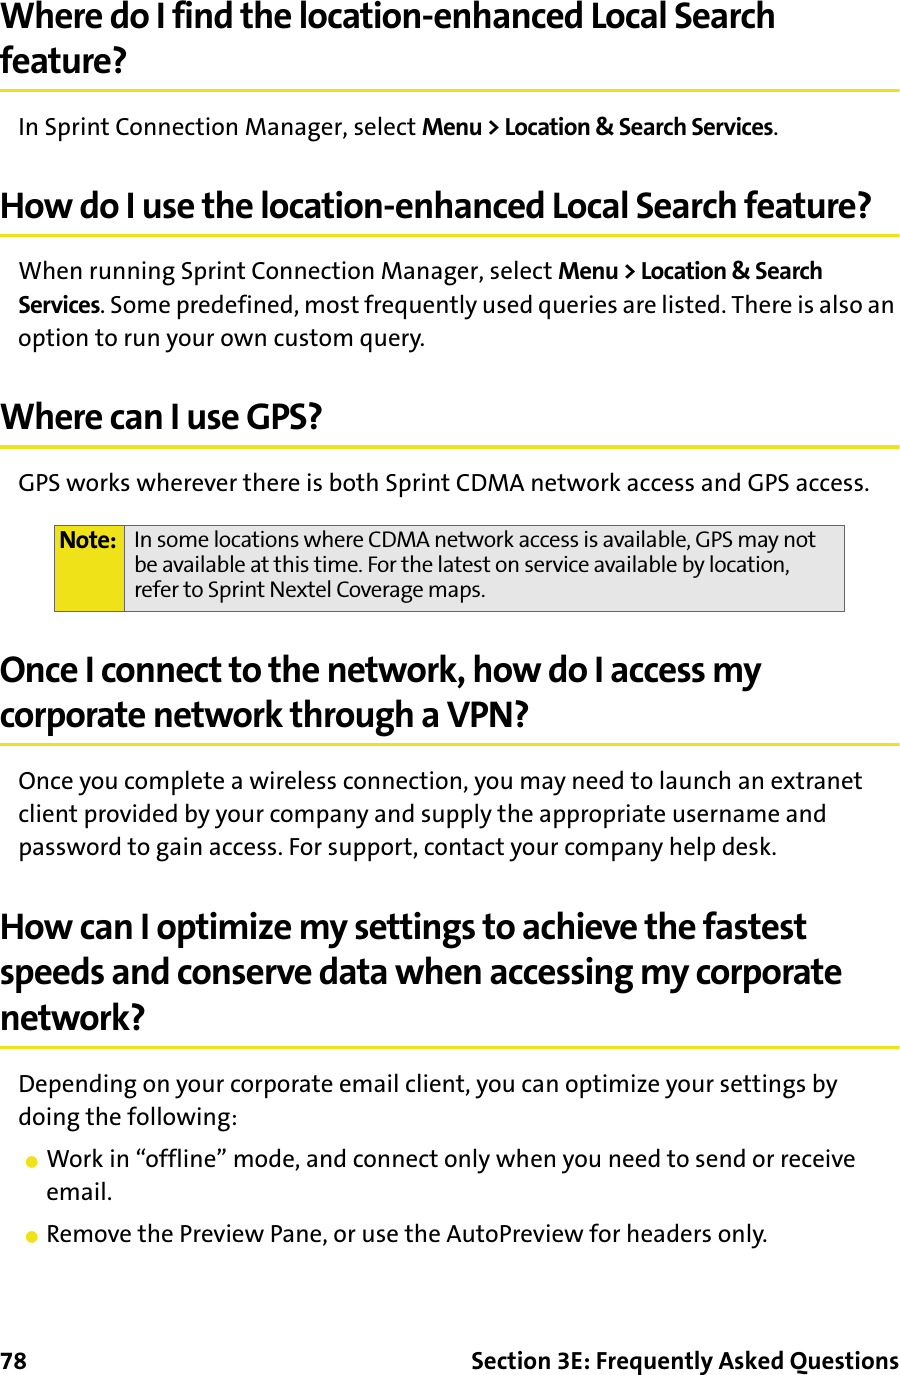 78 Section 3E: Frequently Asked QuestionsWhere do I find the location-enhanced Local Search feature?In Sprint Connection Manager, select Menu &gt; Location &amp; Search Services.How do I use the location-enhanced Local Search feature?When running Sprint Connection Manager, select Menu &gt; Location &amp; Search Services. Some predefined, most frequently used queries are listed. There is also an option to run your own custom query.Where can I use GPS?GPS works wherever there is both Sprint CDMA network access and GPS access.Once I connect to the network, how do I access my corporate network through a VPN?Once you complete a wireless connection, you may need to launch an extranet client provided by your company and supply the appropriate username and password to gain access. For support, contact your company help desk.How can I optimize my settings to achieve the fastest speeds and conserve data when accessing my corporate network?Depending on your corporate email client, you can optimize your settings by doing the following:䢇Work in “offline” mode, and connect only when you need to send or receive email.䢇Remove the Preview Pane, or use the AutoPreview for headers only.Note: In some locations where CDMA network access is available, GPS may not be available at this time. For the latest on service available by location, refer to Sprint Nextel Coverage maps.